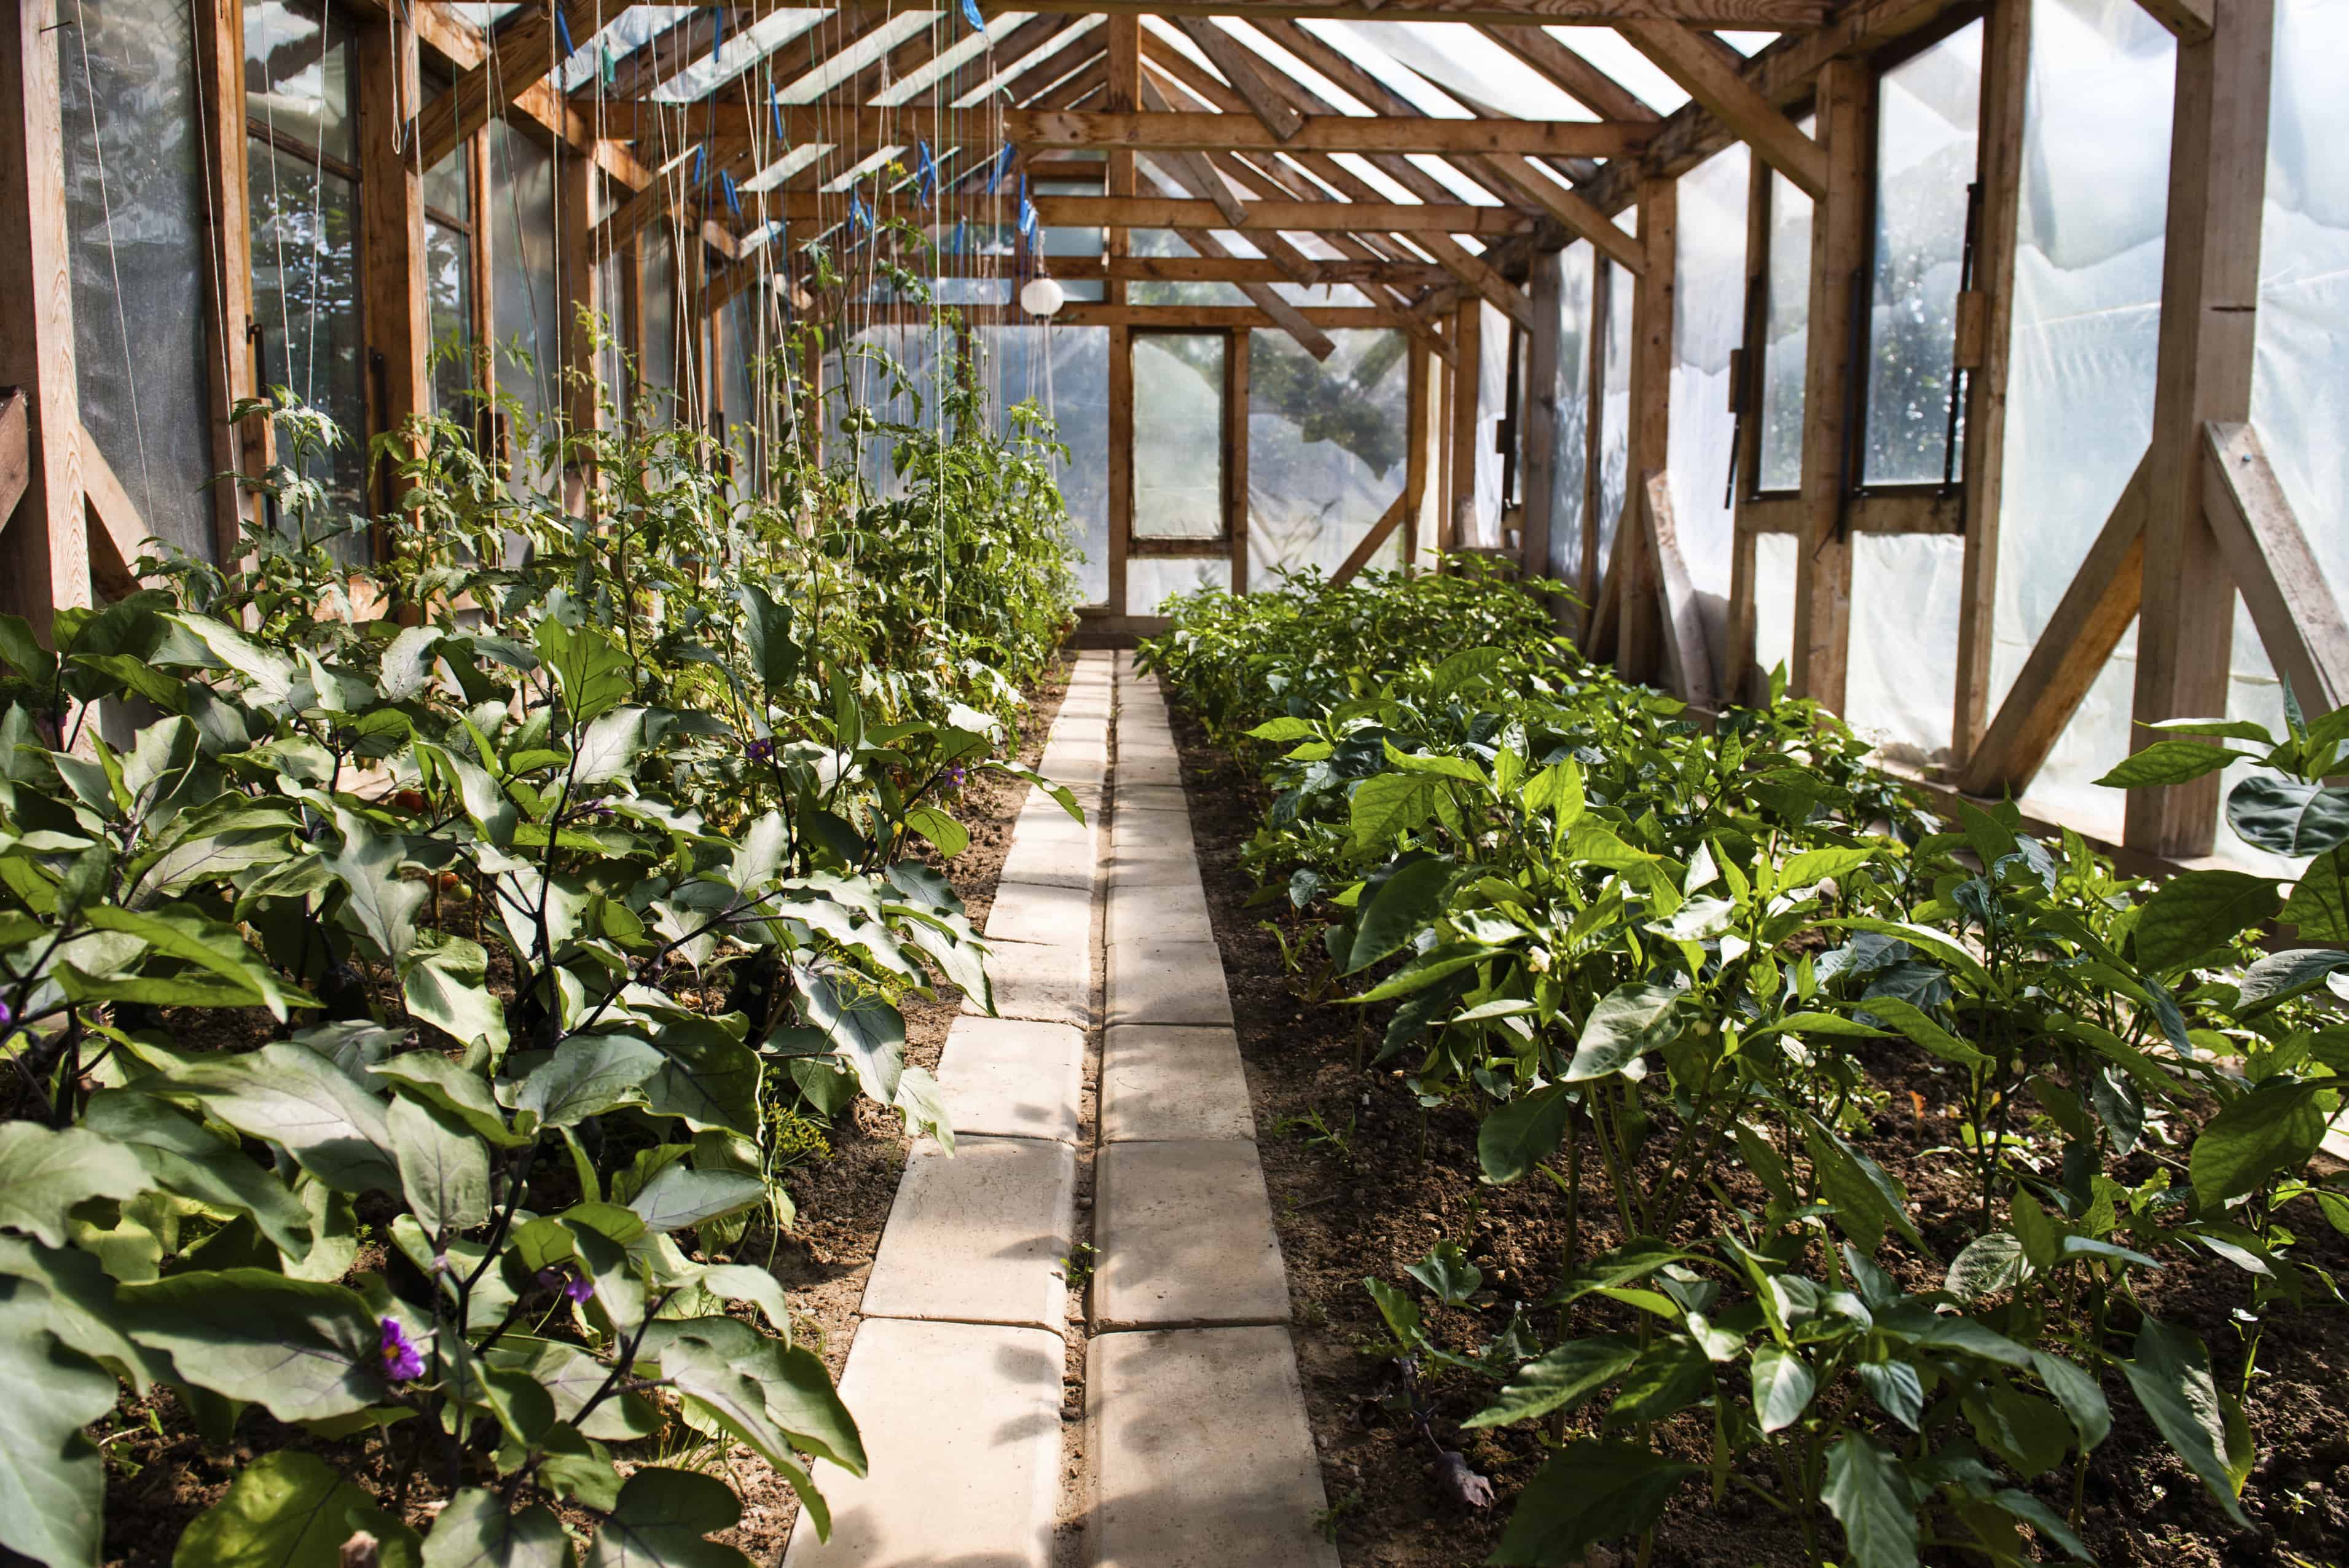 Example of a greenhouse